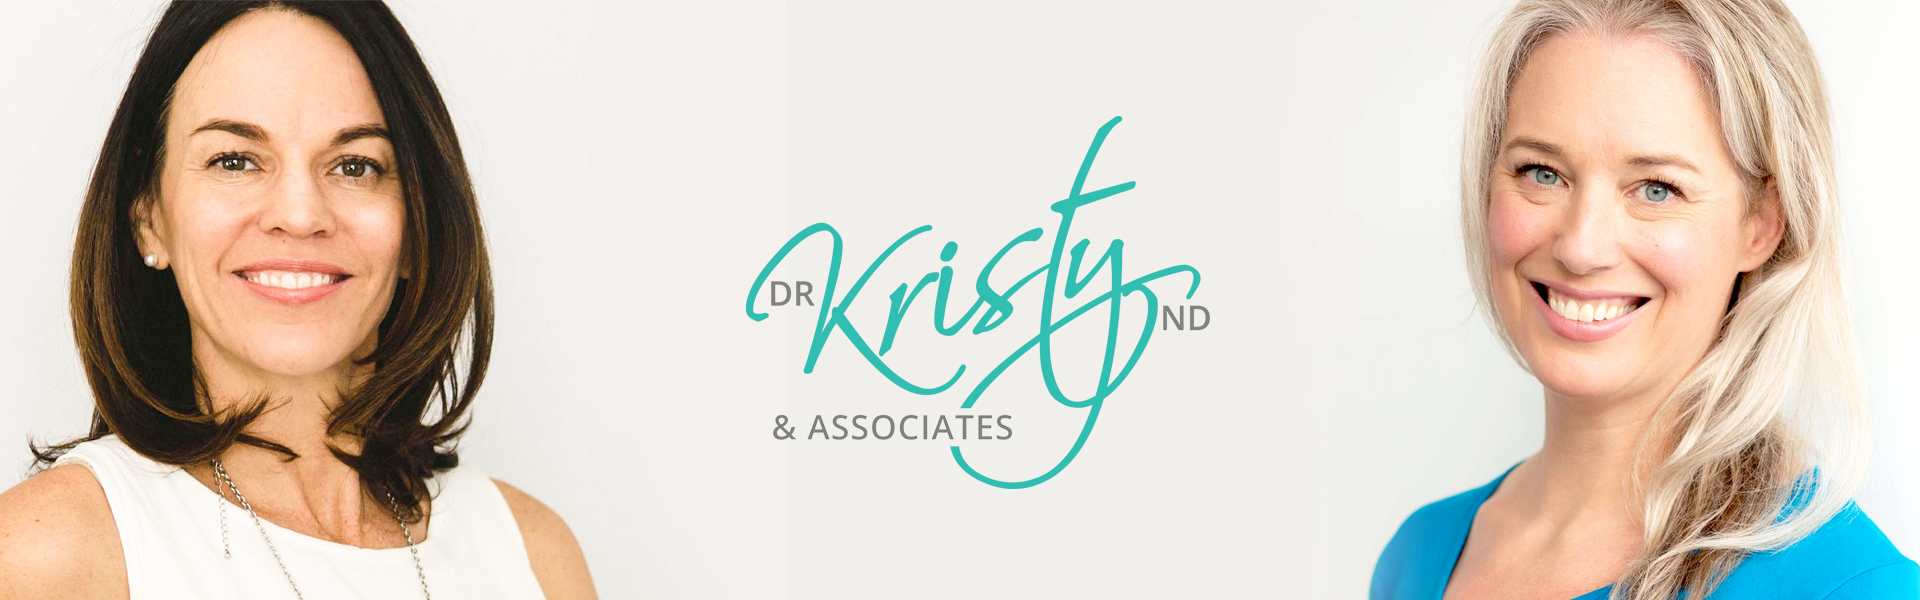 Dr. Kristy and Dr. Rachelle